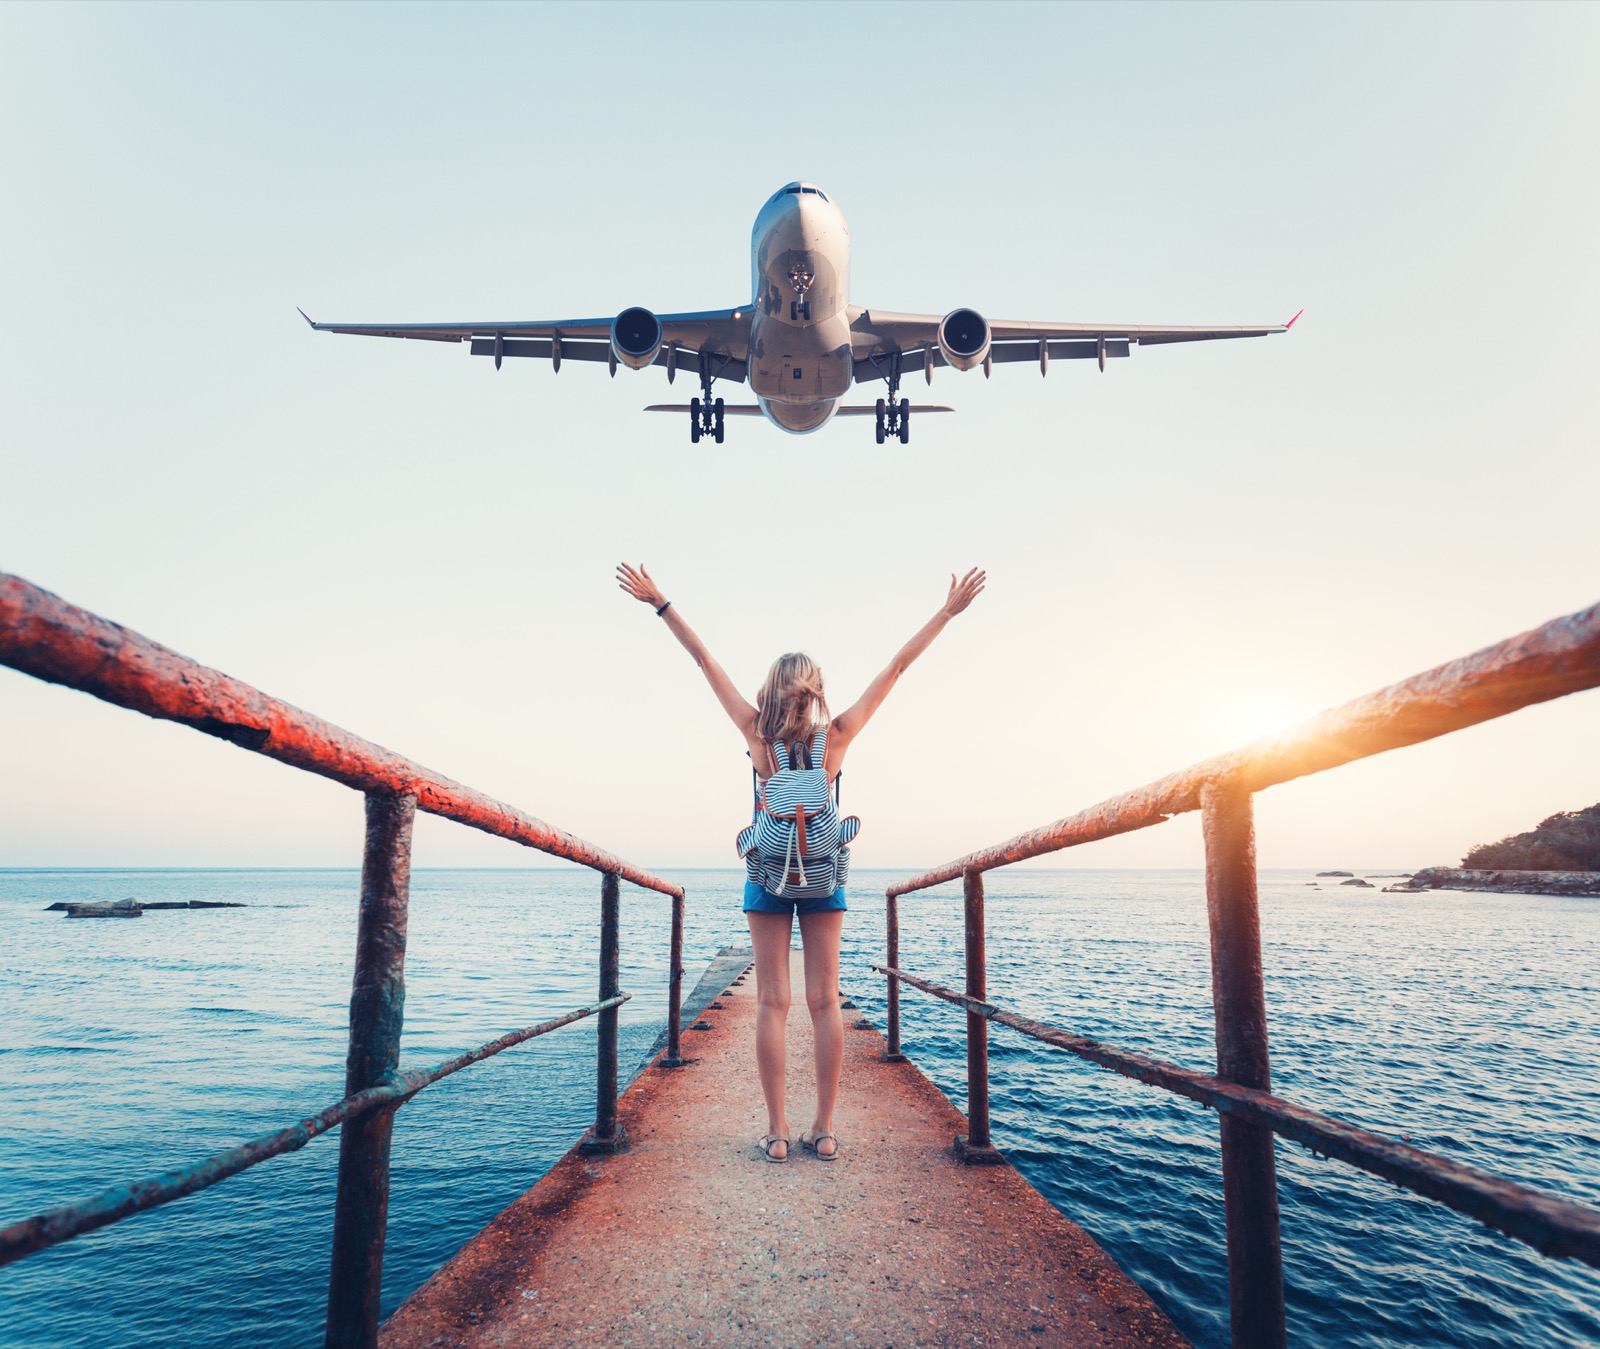 ✈️ Travel Somewhere for Each Letter of the Alphabet and We’ll Tell You Your Fortune Airplane And Woman At Sunset. Summer Landscape With Girl Standing On The Sea Pier With Raised Up Arms And Flying Passenger Airplane. Woman And Landing Commercial Plane In The Evening. Lifestyle